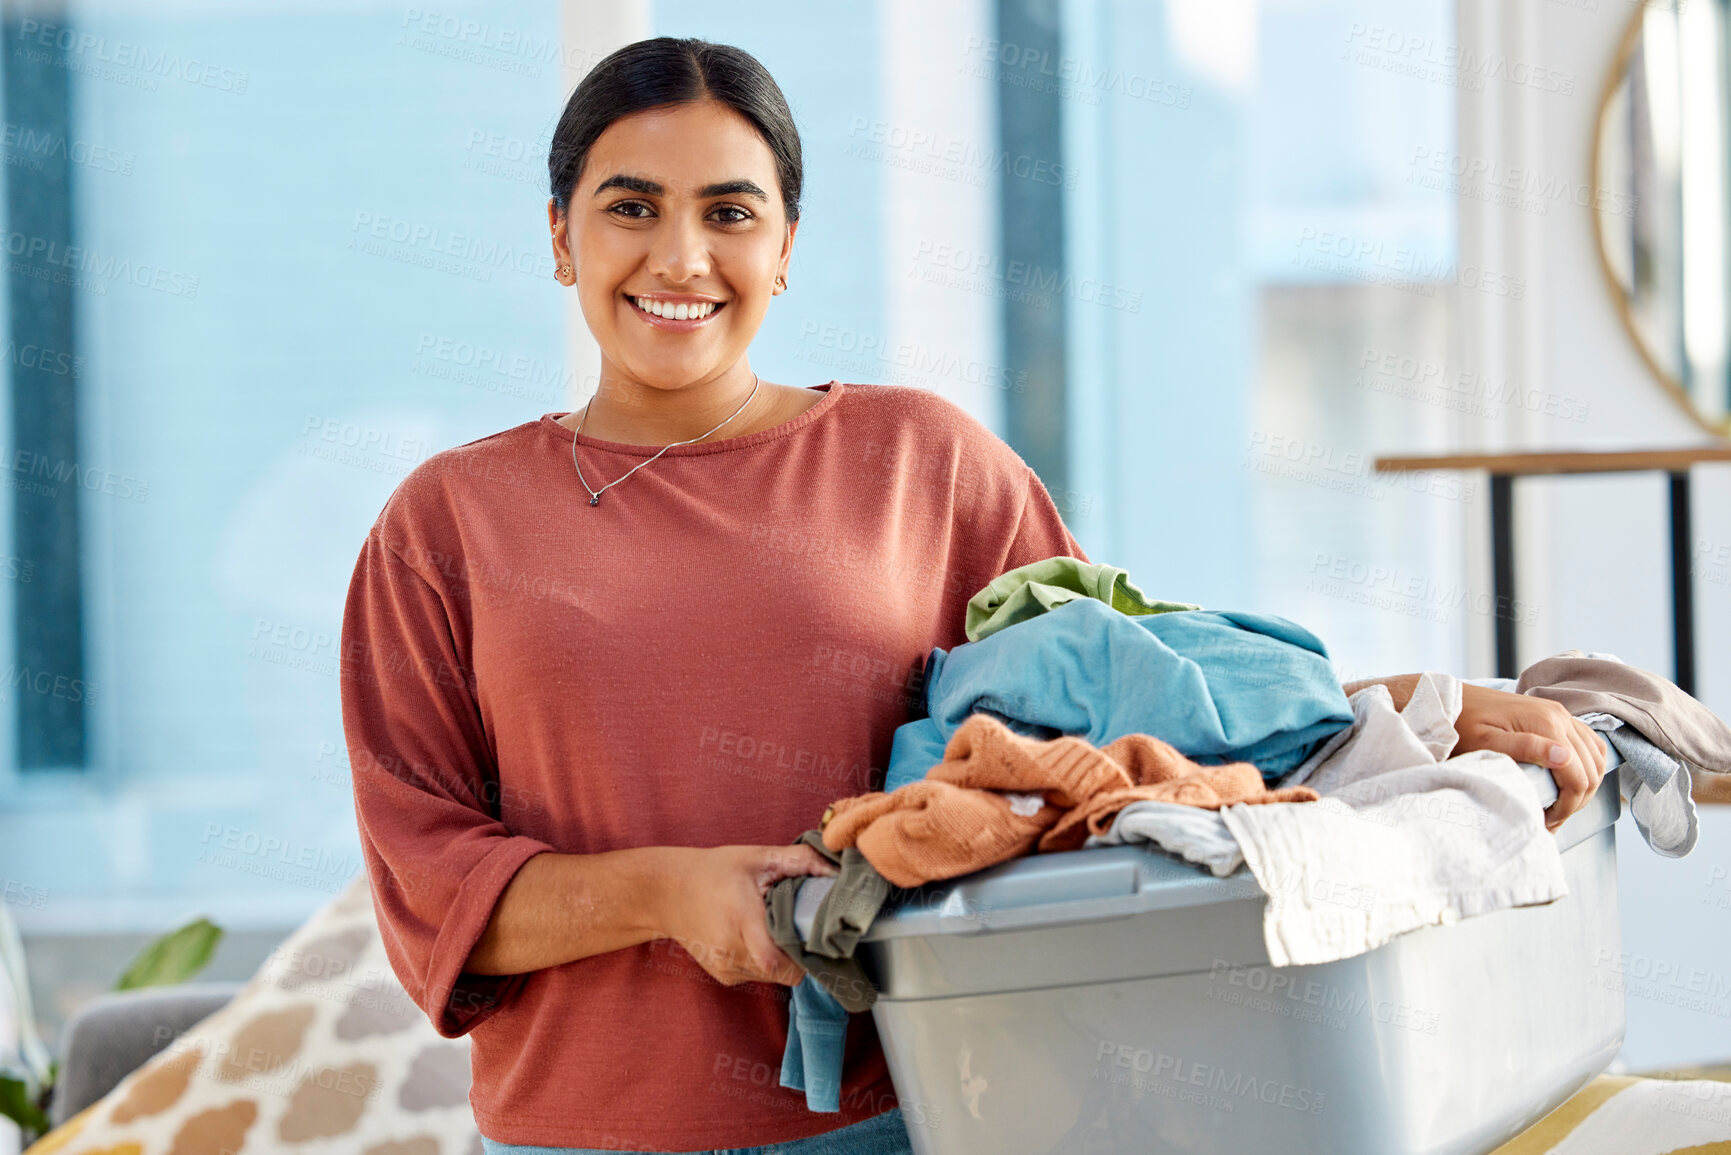 Buy stock photo Cleaning, cleaner and woman with laundry, clothes washing and cleaner service, housekeeping and hygiene. Wash fabric, clean and spring cleaning, housework portrait and housekeeper with laundry basket